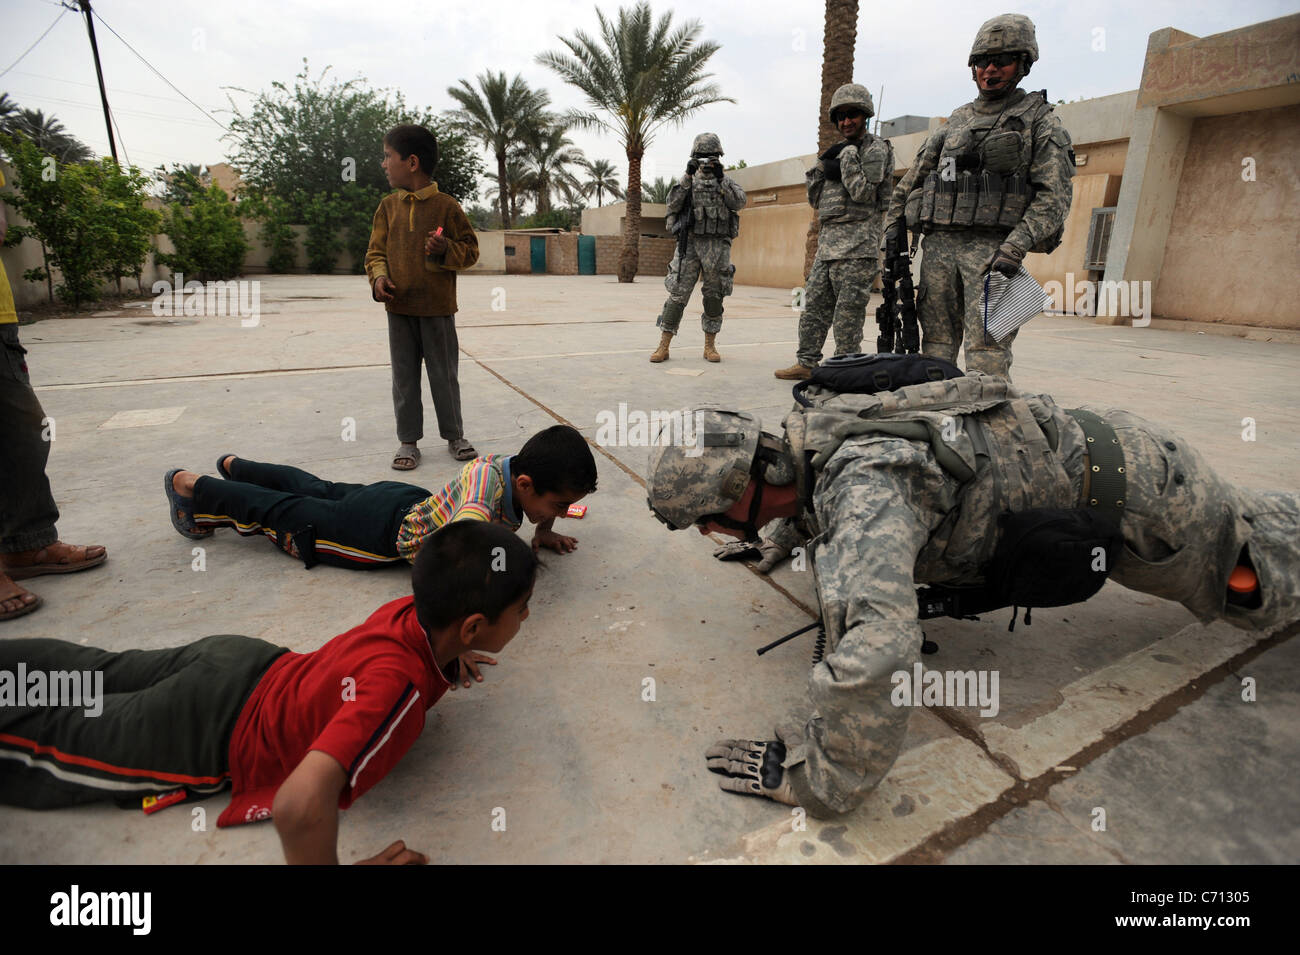 U.S. Army Staff Sgt. Josh Hedetniemi does pushups to amuse Iraqi children outside a school near Sheik Hammad, Iraq, on April 8, 2009. Hedetniemi is from Alpha Company, 1st Battalion, 111th Infantry Regiment, 56th Stryker Brigade Combat Team, 28th Infantry Division. DoD photo by Sgt. Jacob H. Smith, U.S. Army. (Released) Stock Photo